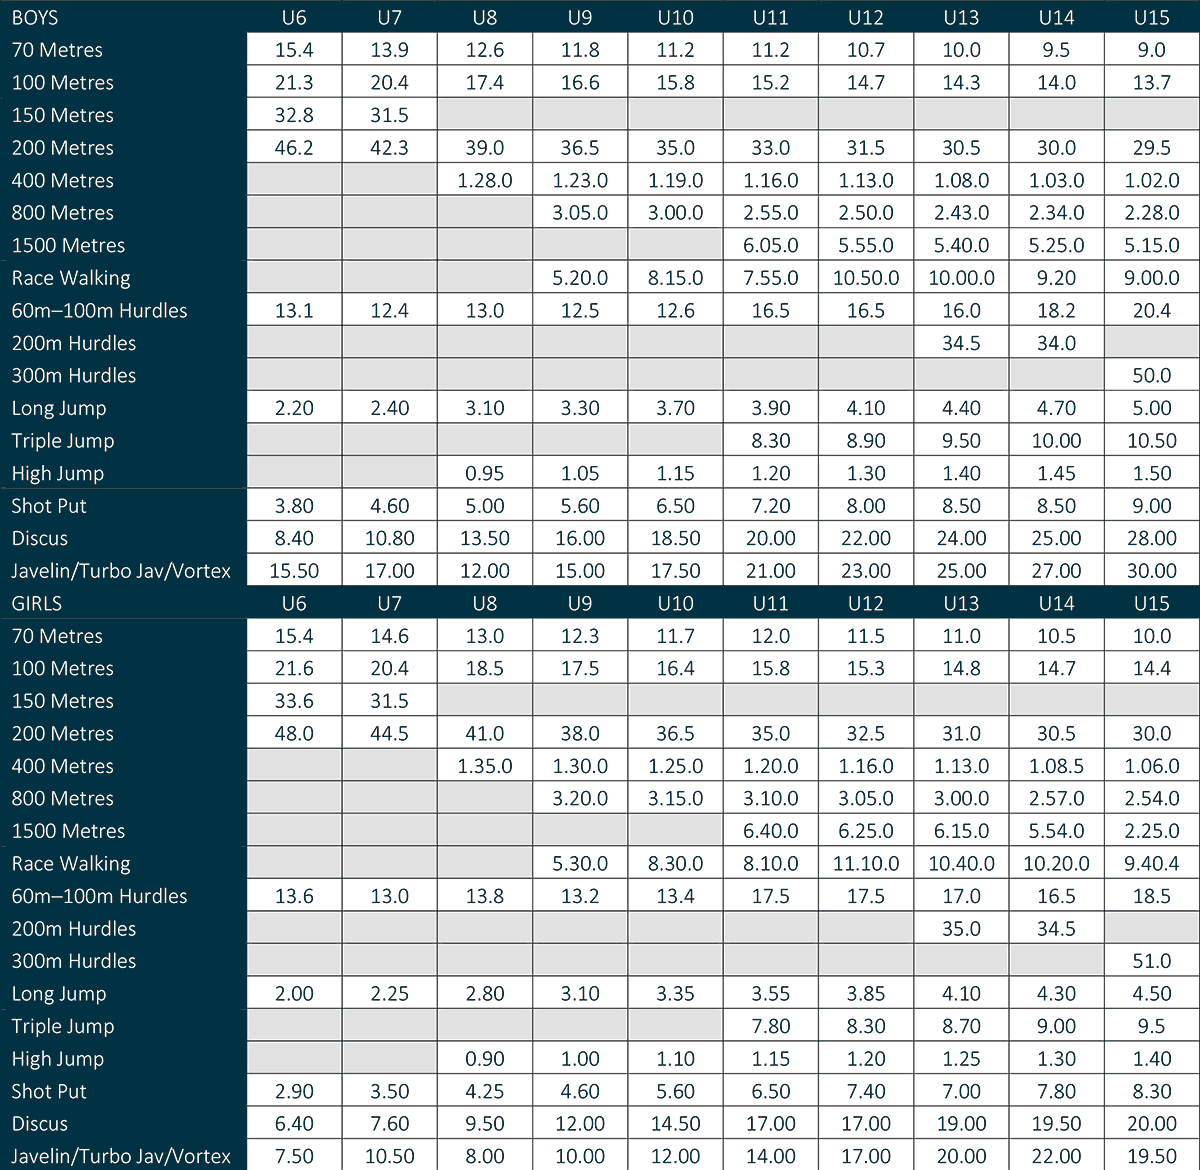 https://sllac.org.au/wp-content/uploads/2021/11/Qualifying-Standards-2021-2022.png